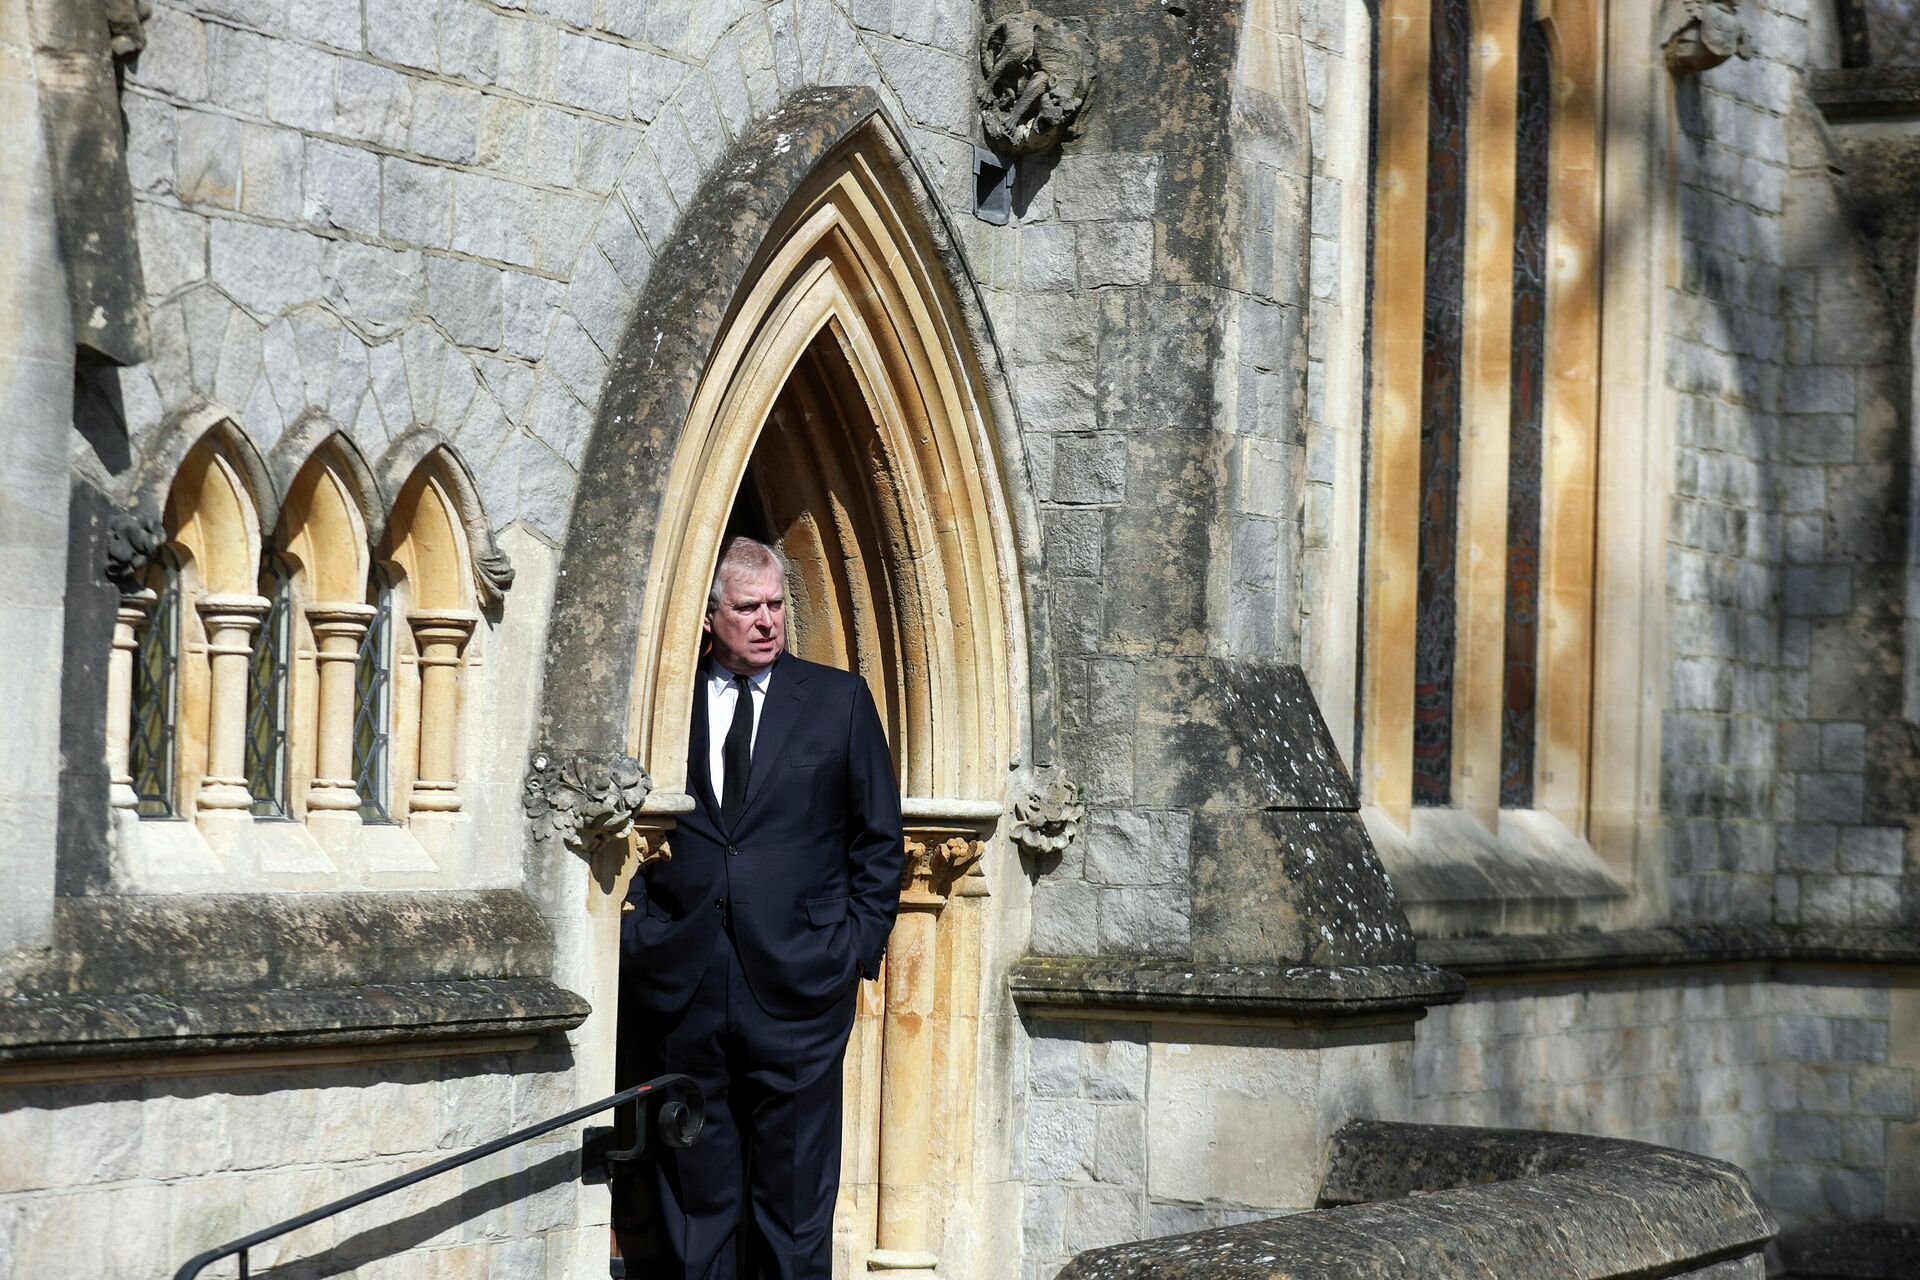 Britain's Prince Andrew, Duke of York, attends Sunday service at the Royal Chapel of All Saints, at Royal Lodge, in Windsor on April 11, 2021, two days after the death of his father Britain's Prince Philip, Duke of Edinburgh. - Sputnik International, 1920, 02.10.2021